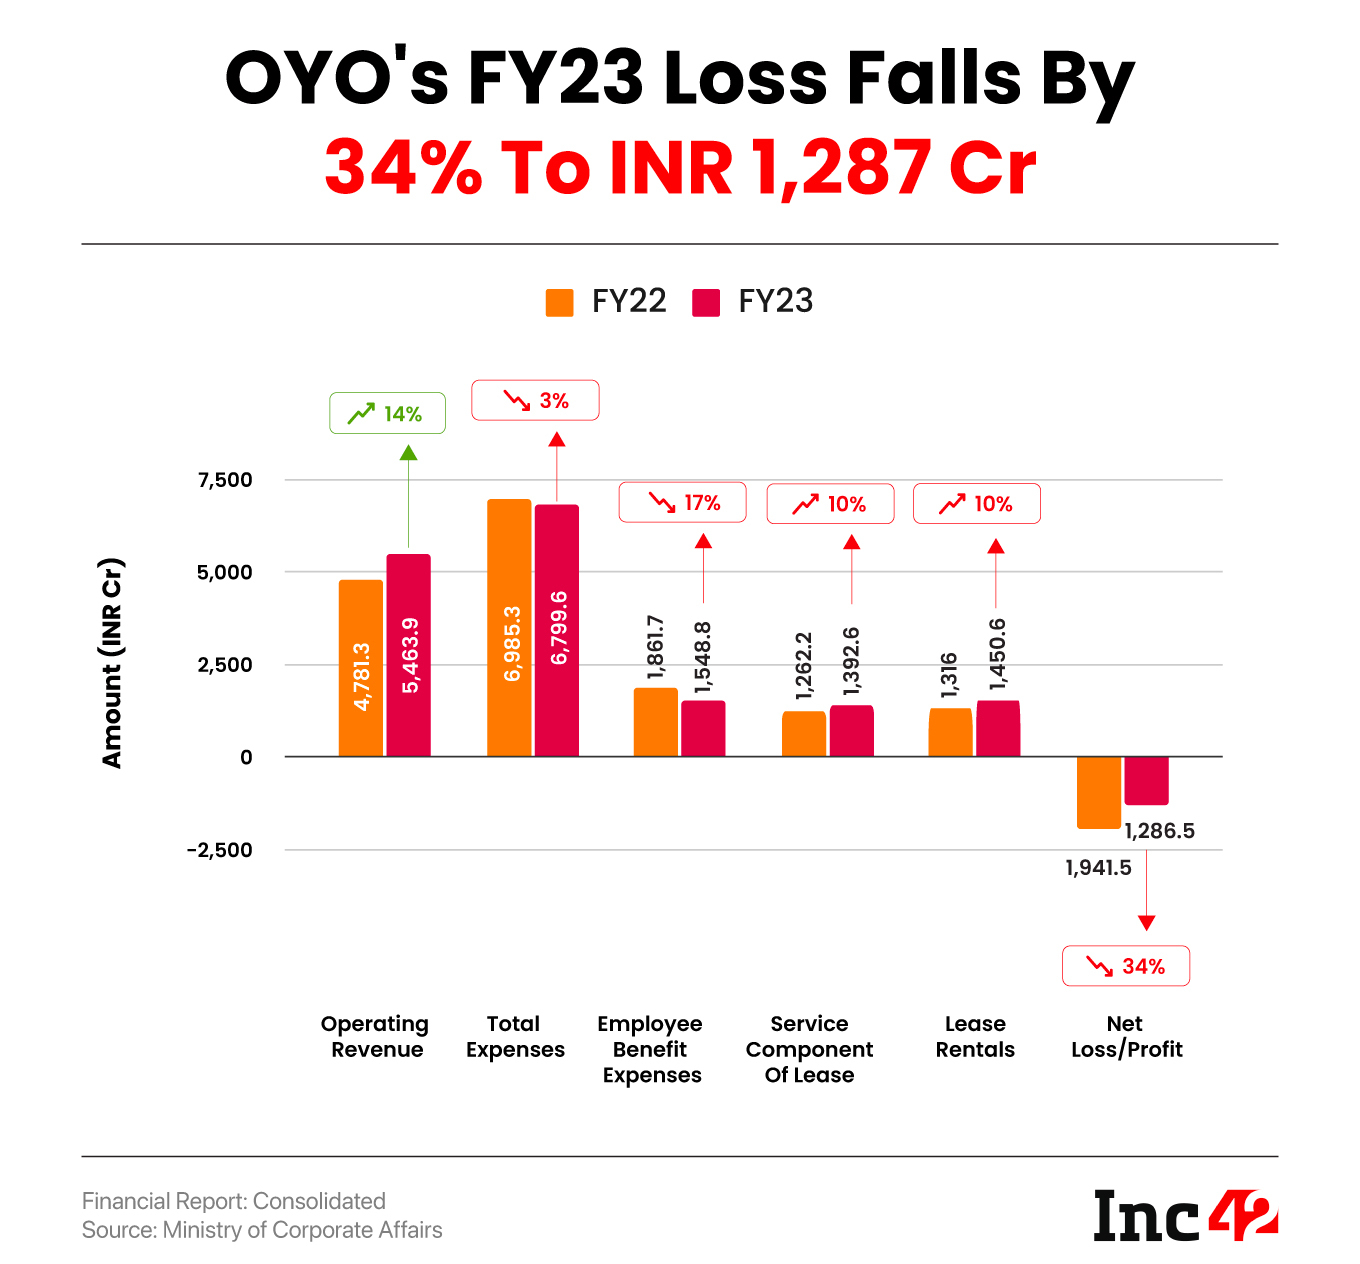 IPO-bound hospitality unicorn OYO reported a 34% decrease in its net loss to INR 1,286.5 Cr in FY23 from INR 1,941.5 Cr